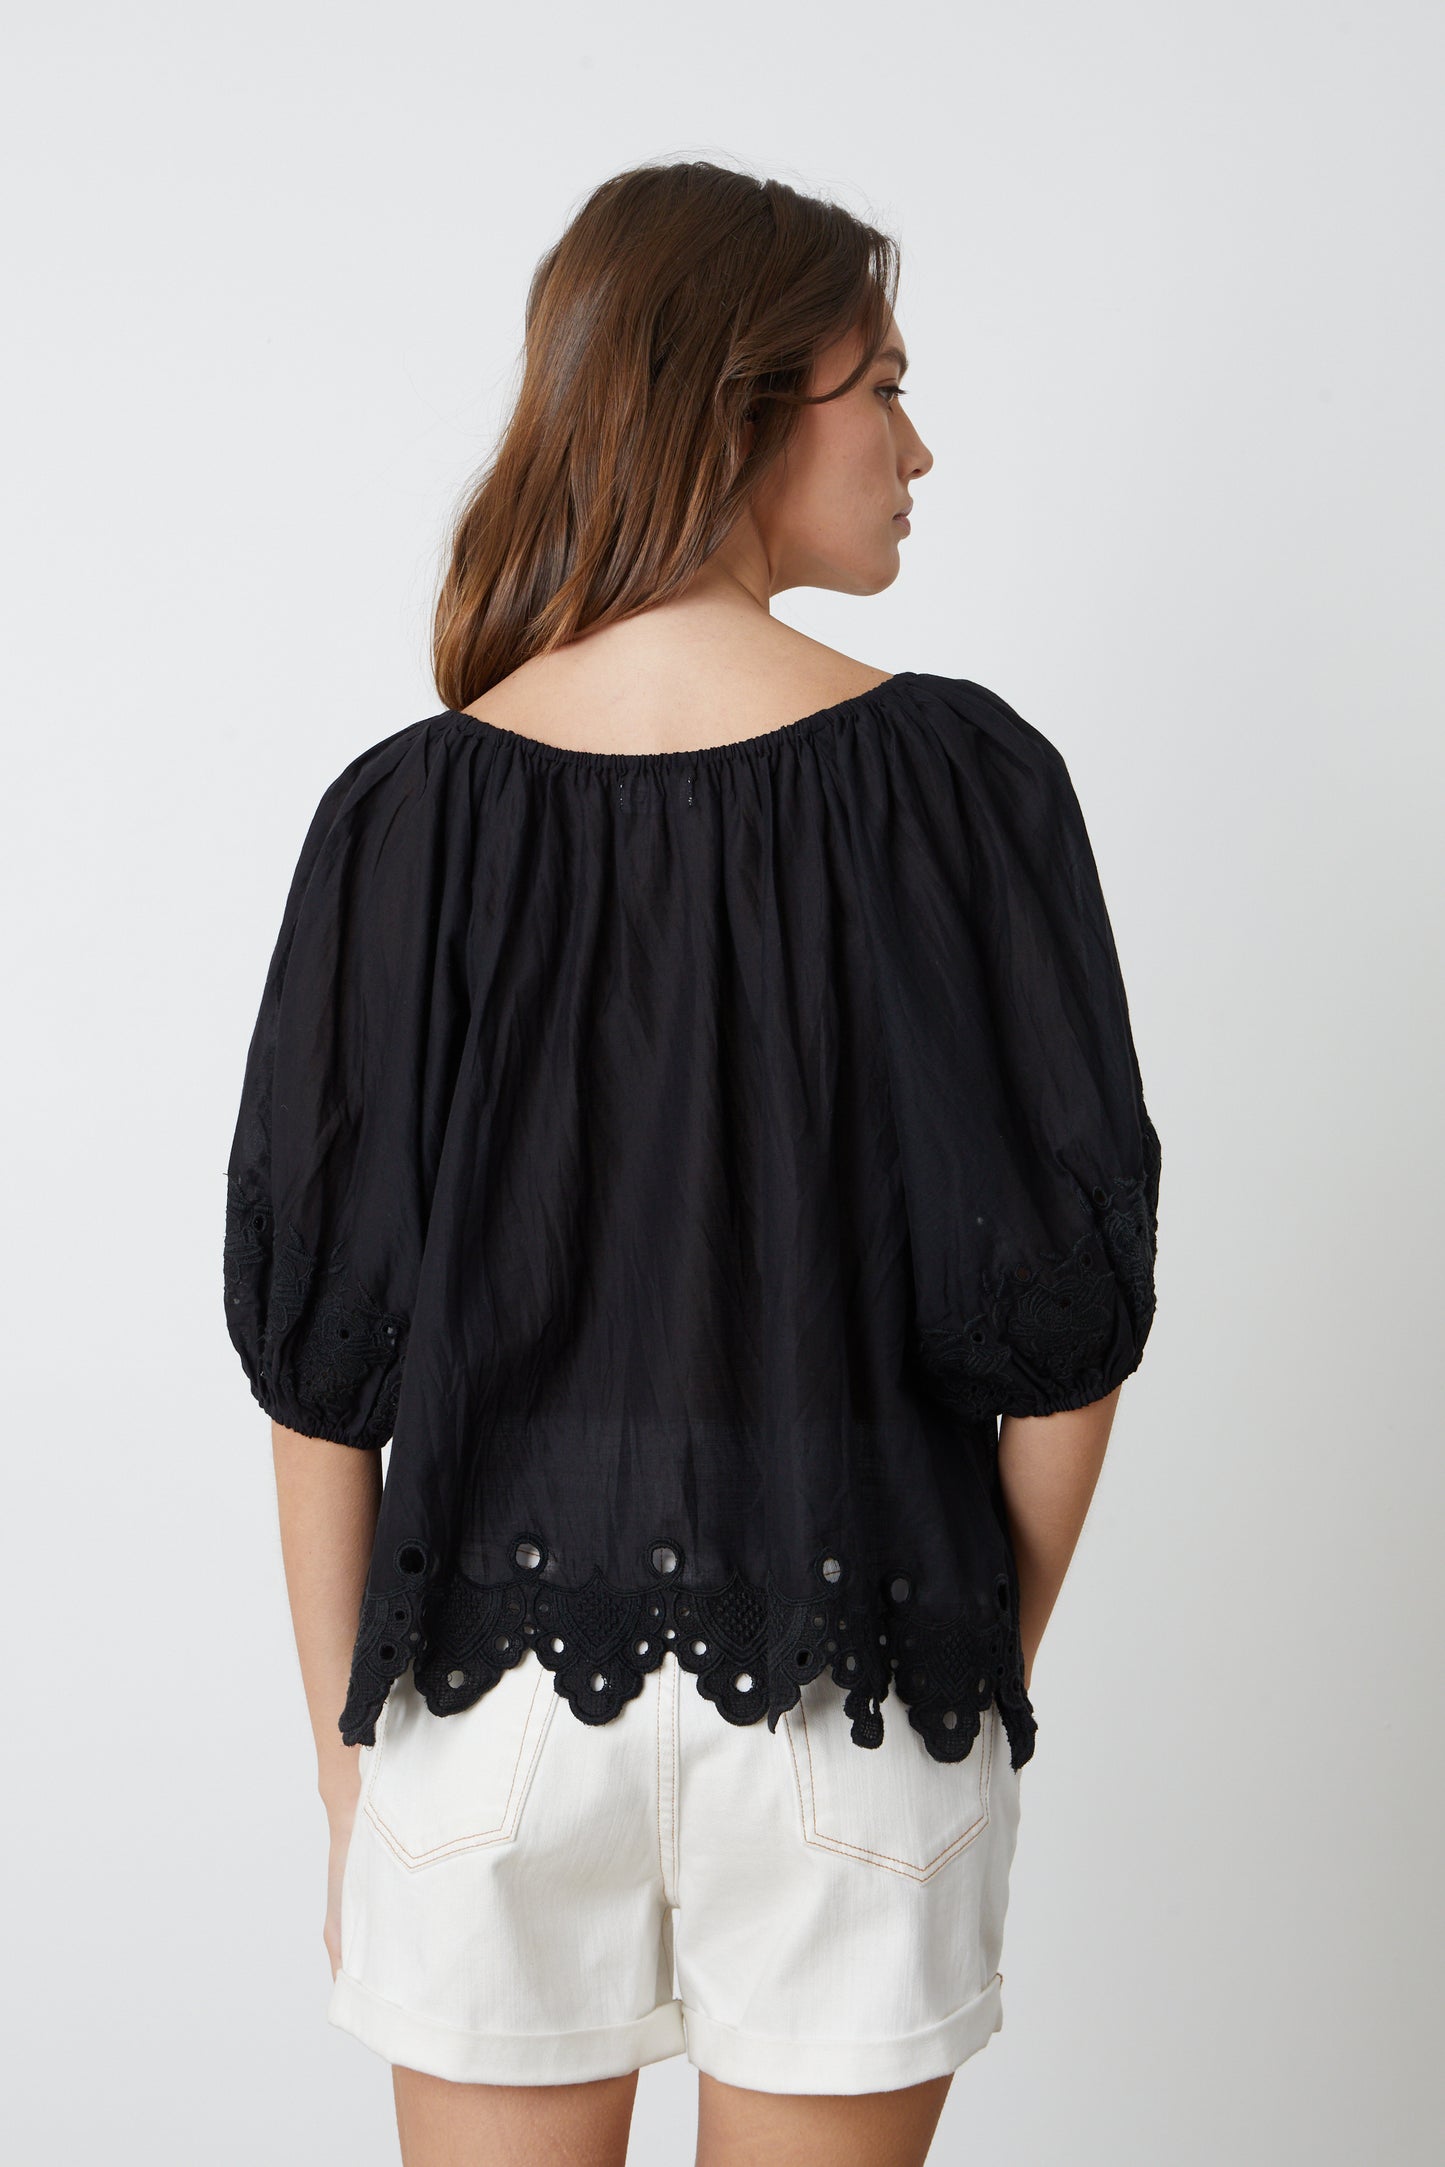 The back view of a woman wearing the Velvet by Graham & Spencer ABIGAIL SCHIFFLI EYELET BLOUSE.-26577407934657